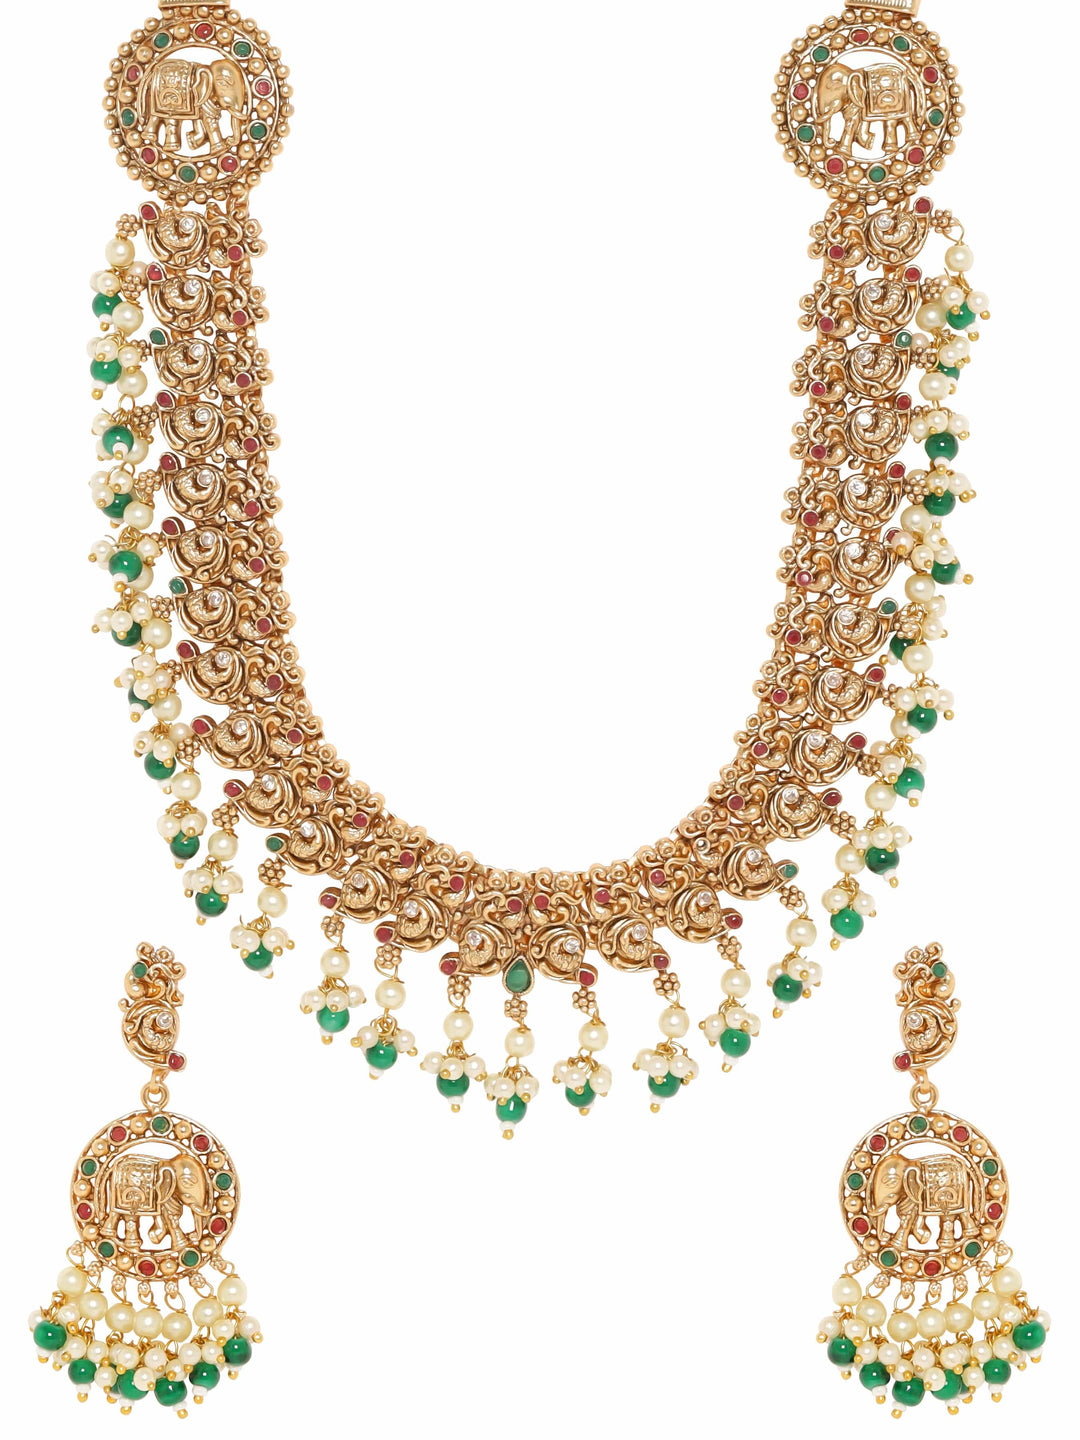 Rubans Illuminating Beauty with a Gold-Toned Temple Necklace Set Jewellery Sets